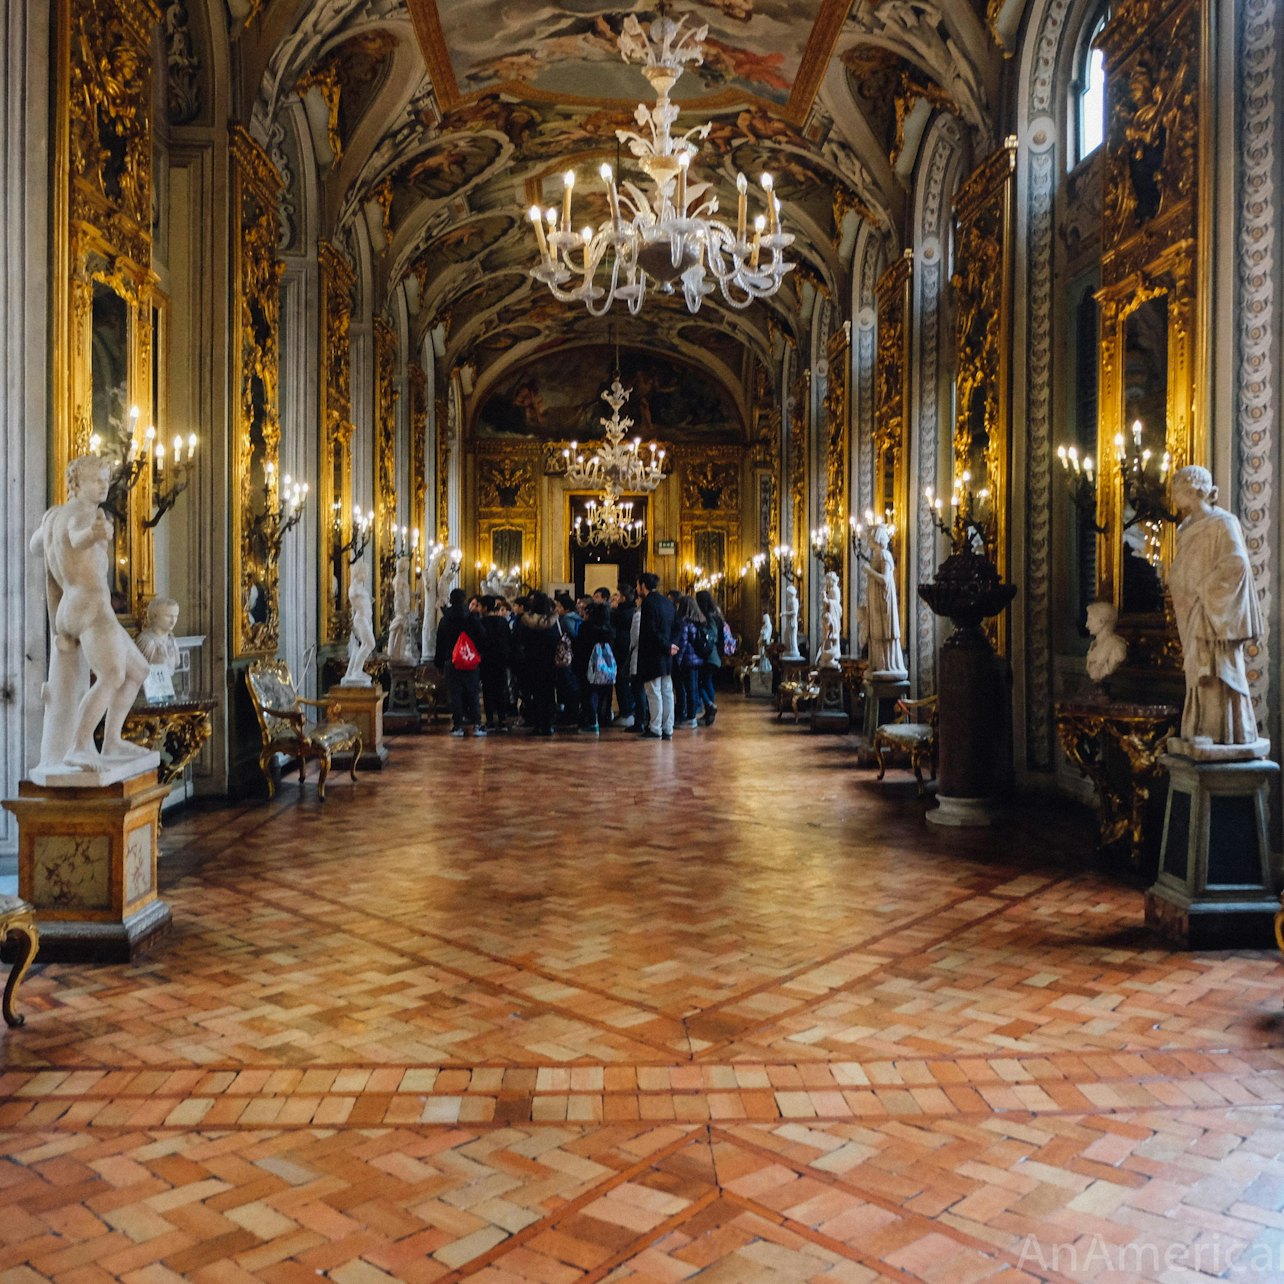 The Doria Pamphilj Gallery - Accommodations in Rome